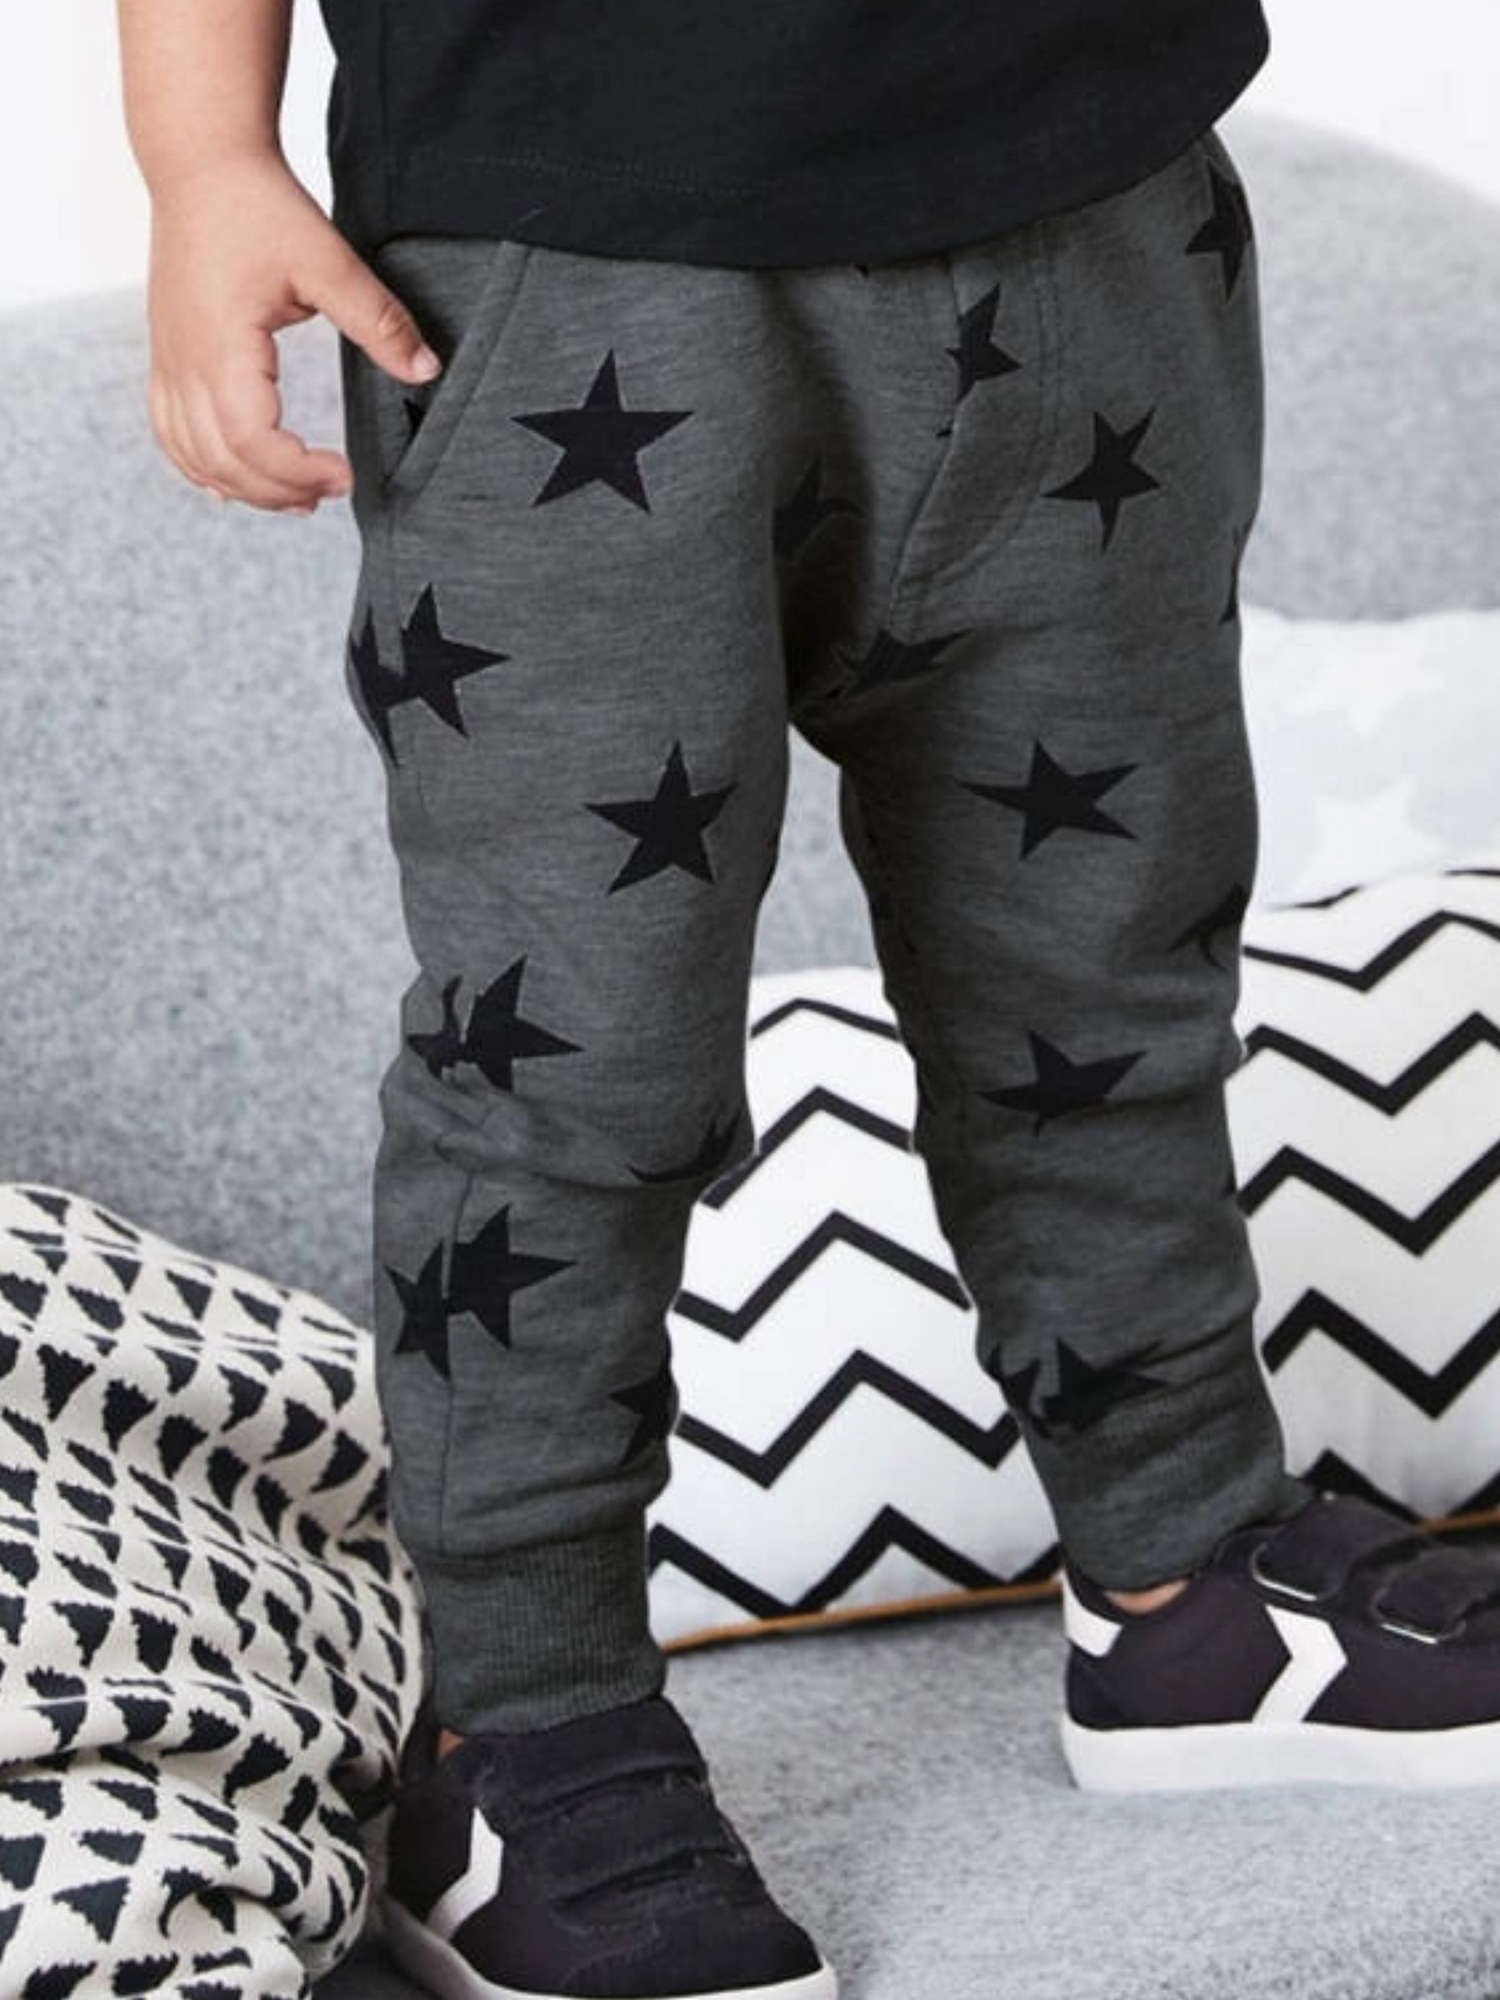 BOYS STAR PLAYER JOGGER IN GRAY - THE LITTLE EAGLE BOUTIQUE